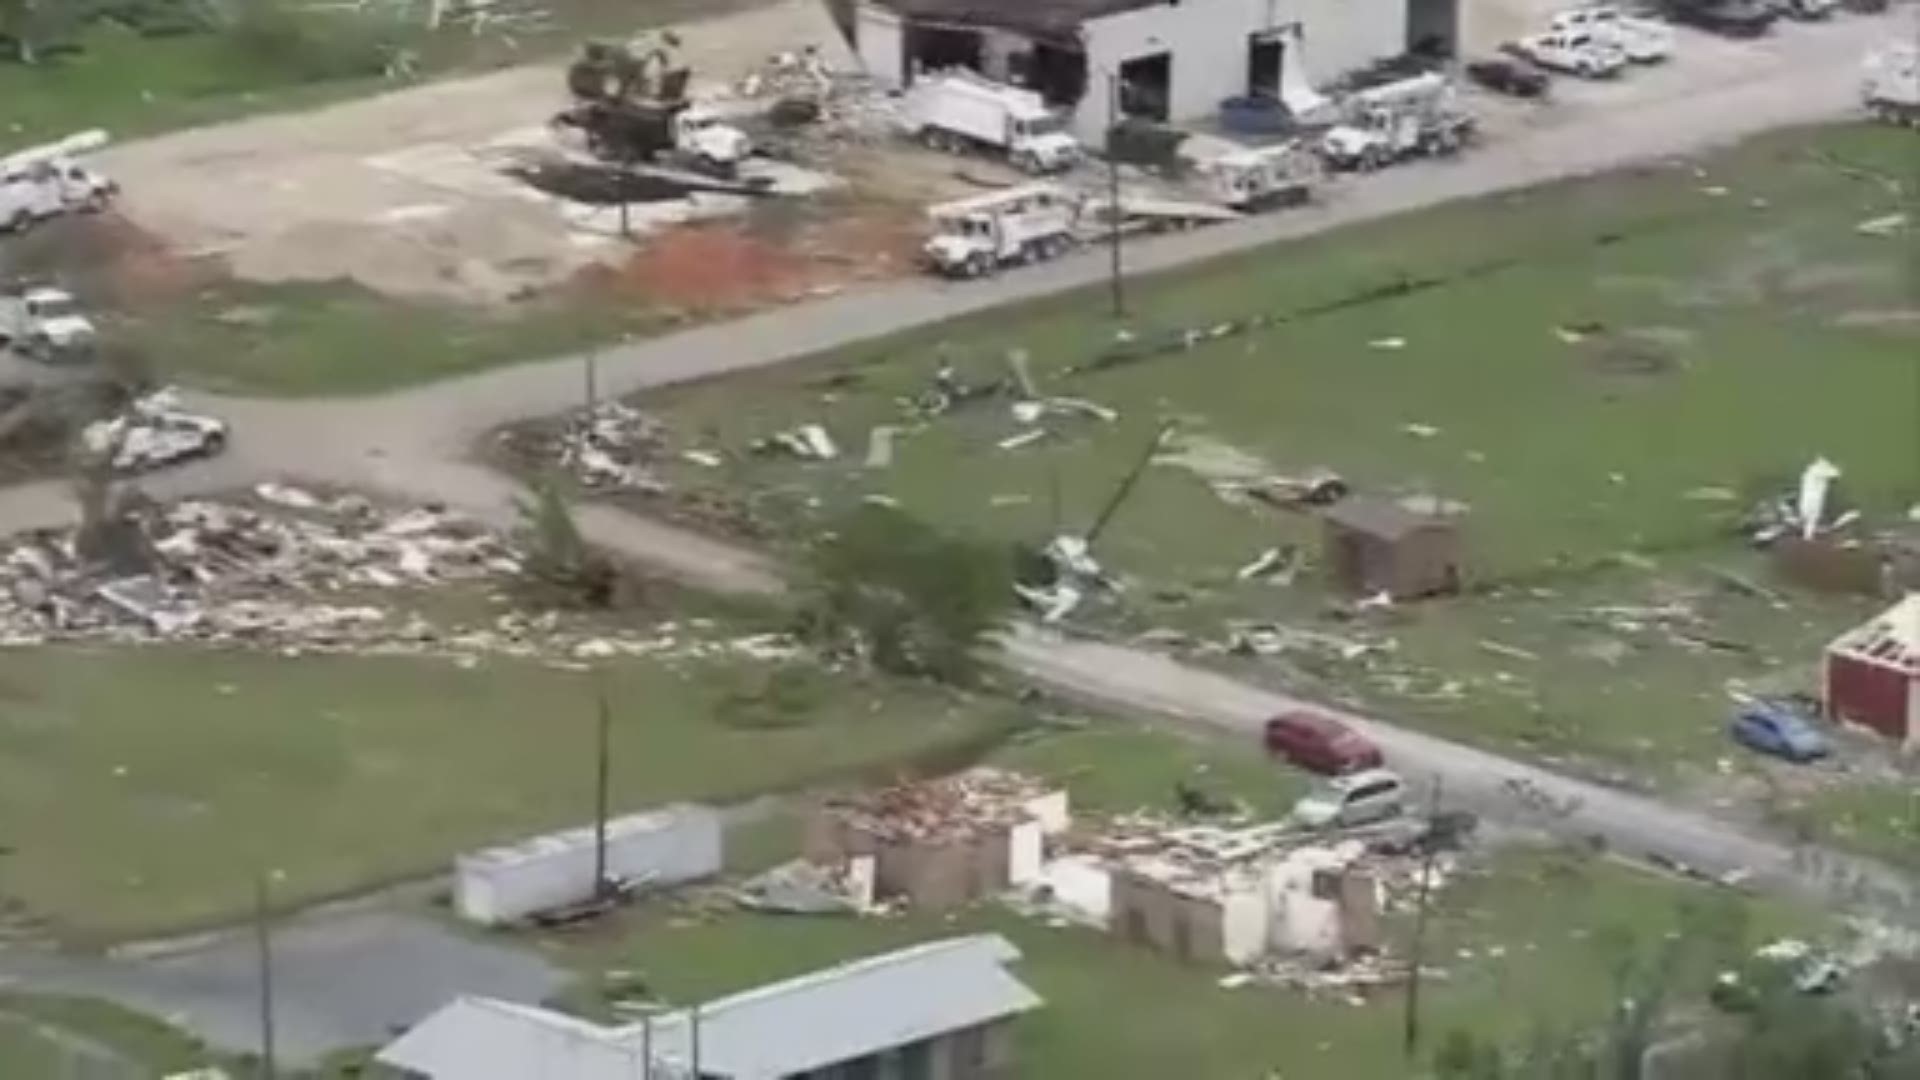 Storms ripped through Texas yesterday, spawning tornadoes.